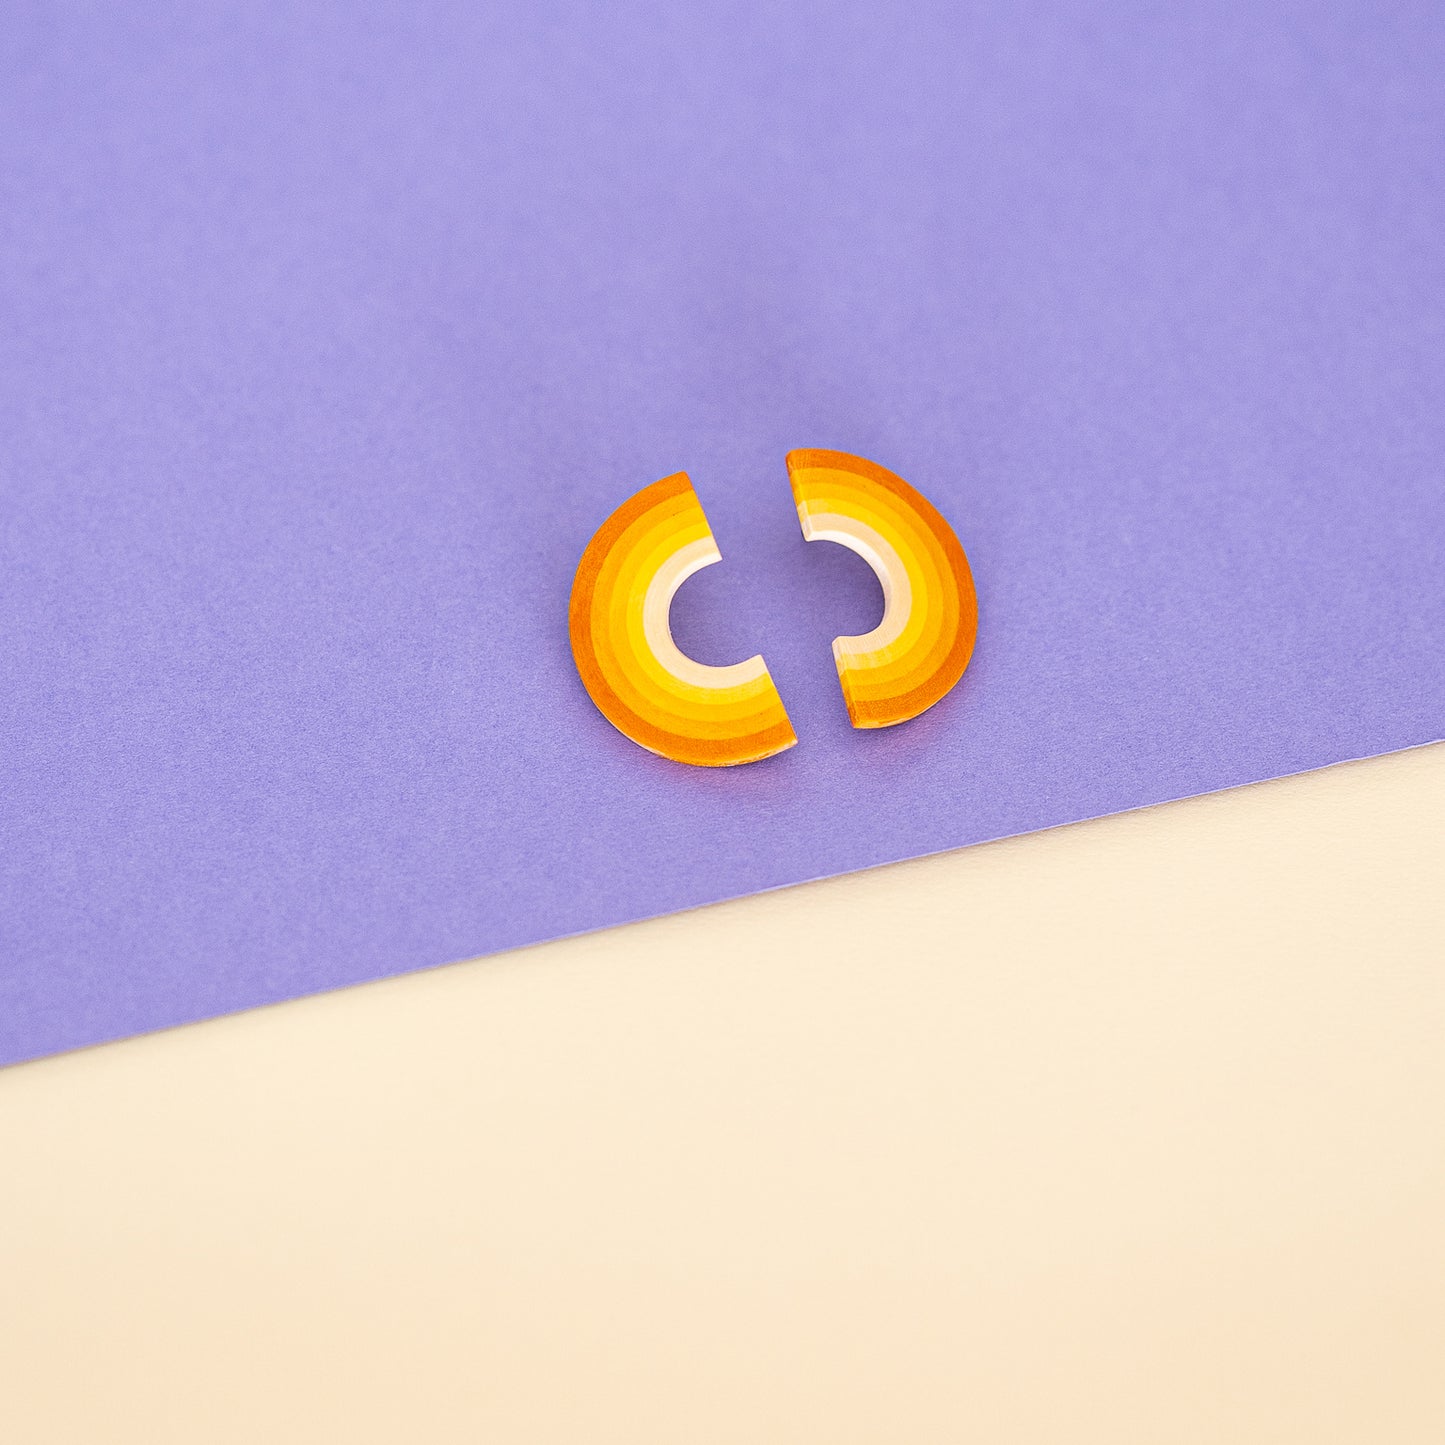 Earrings made from compressed paper with a titanium stud in yellow and orange on colored paper.